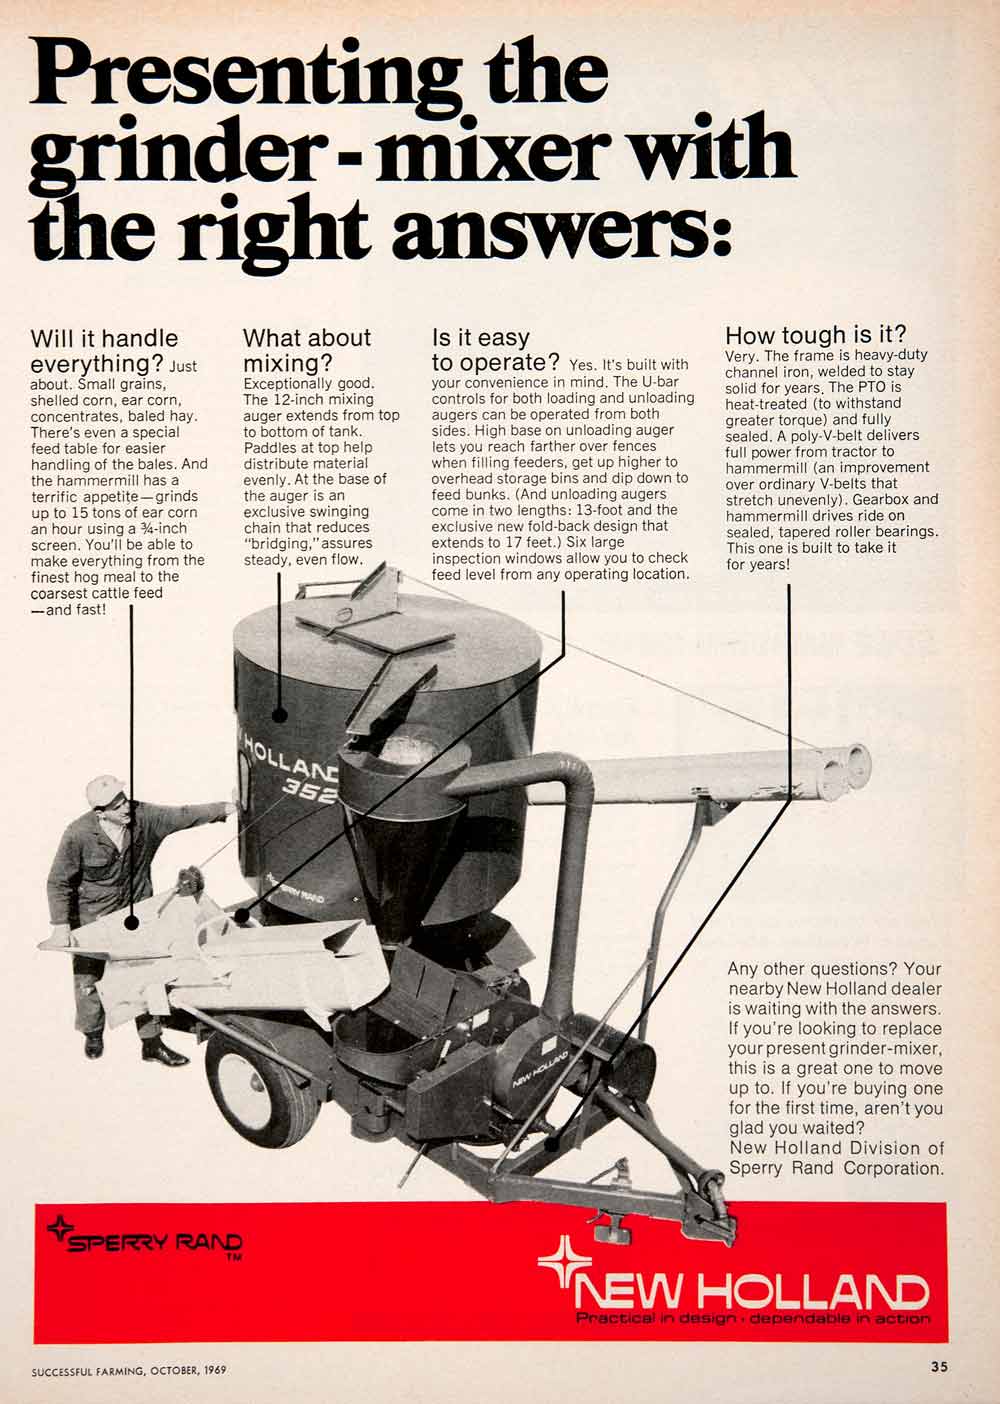 1969 Ad New Holland Speery Rand Grinder Mixer Farming Equipment Agriculture SF3